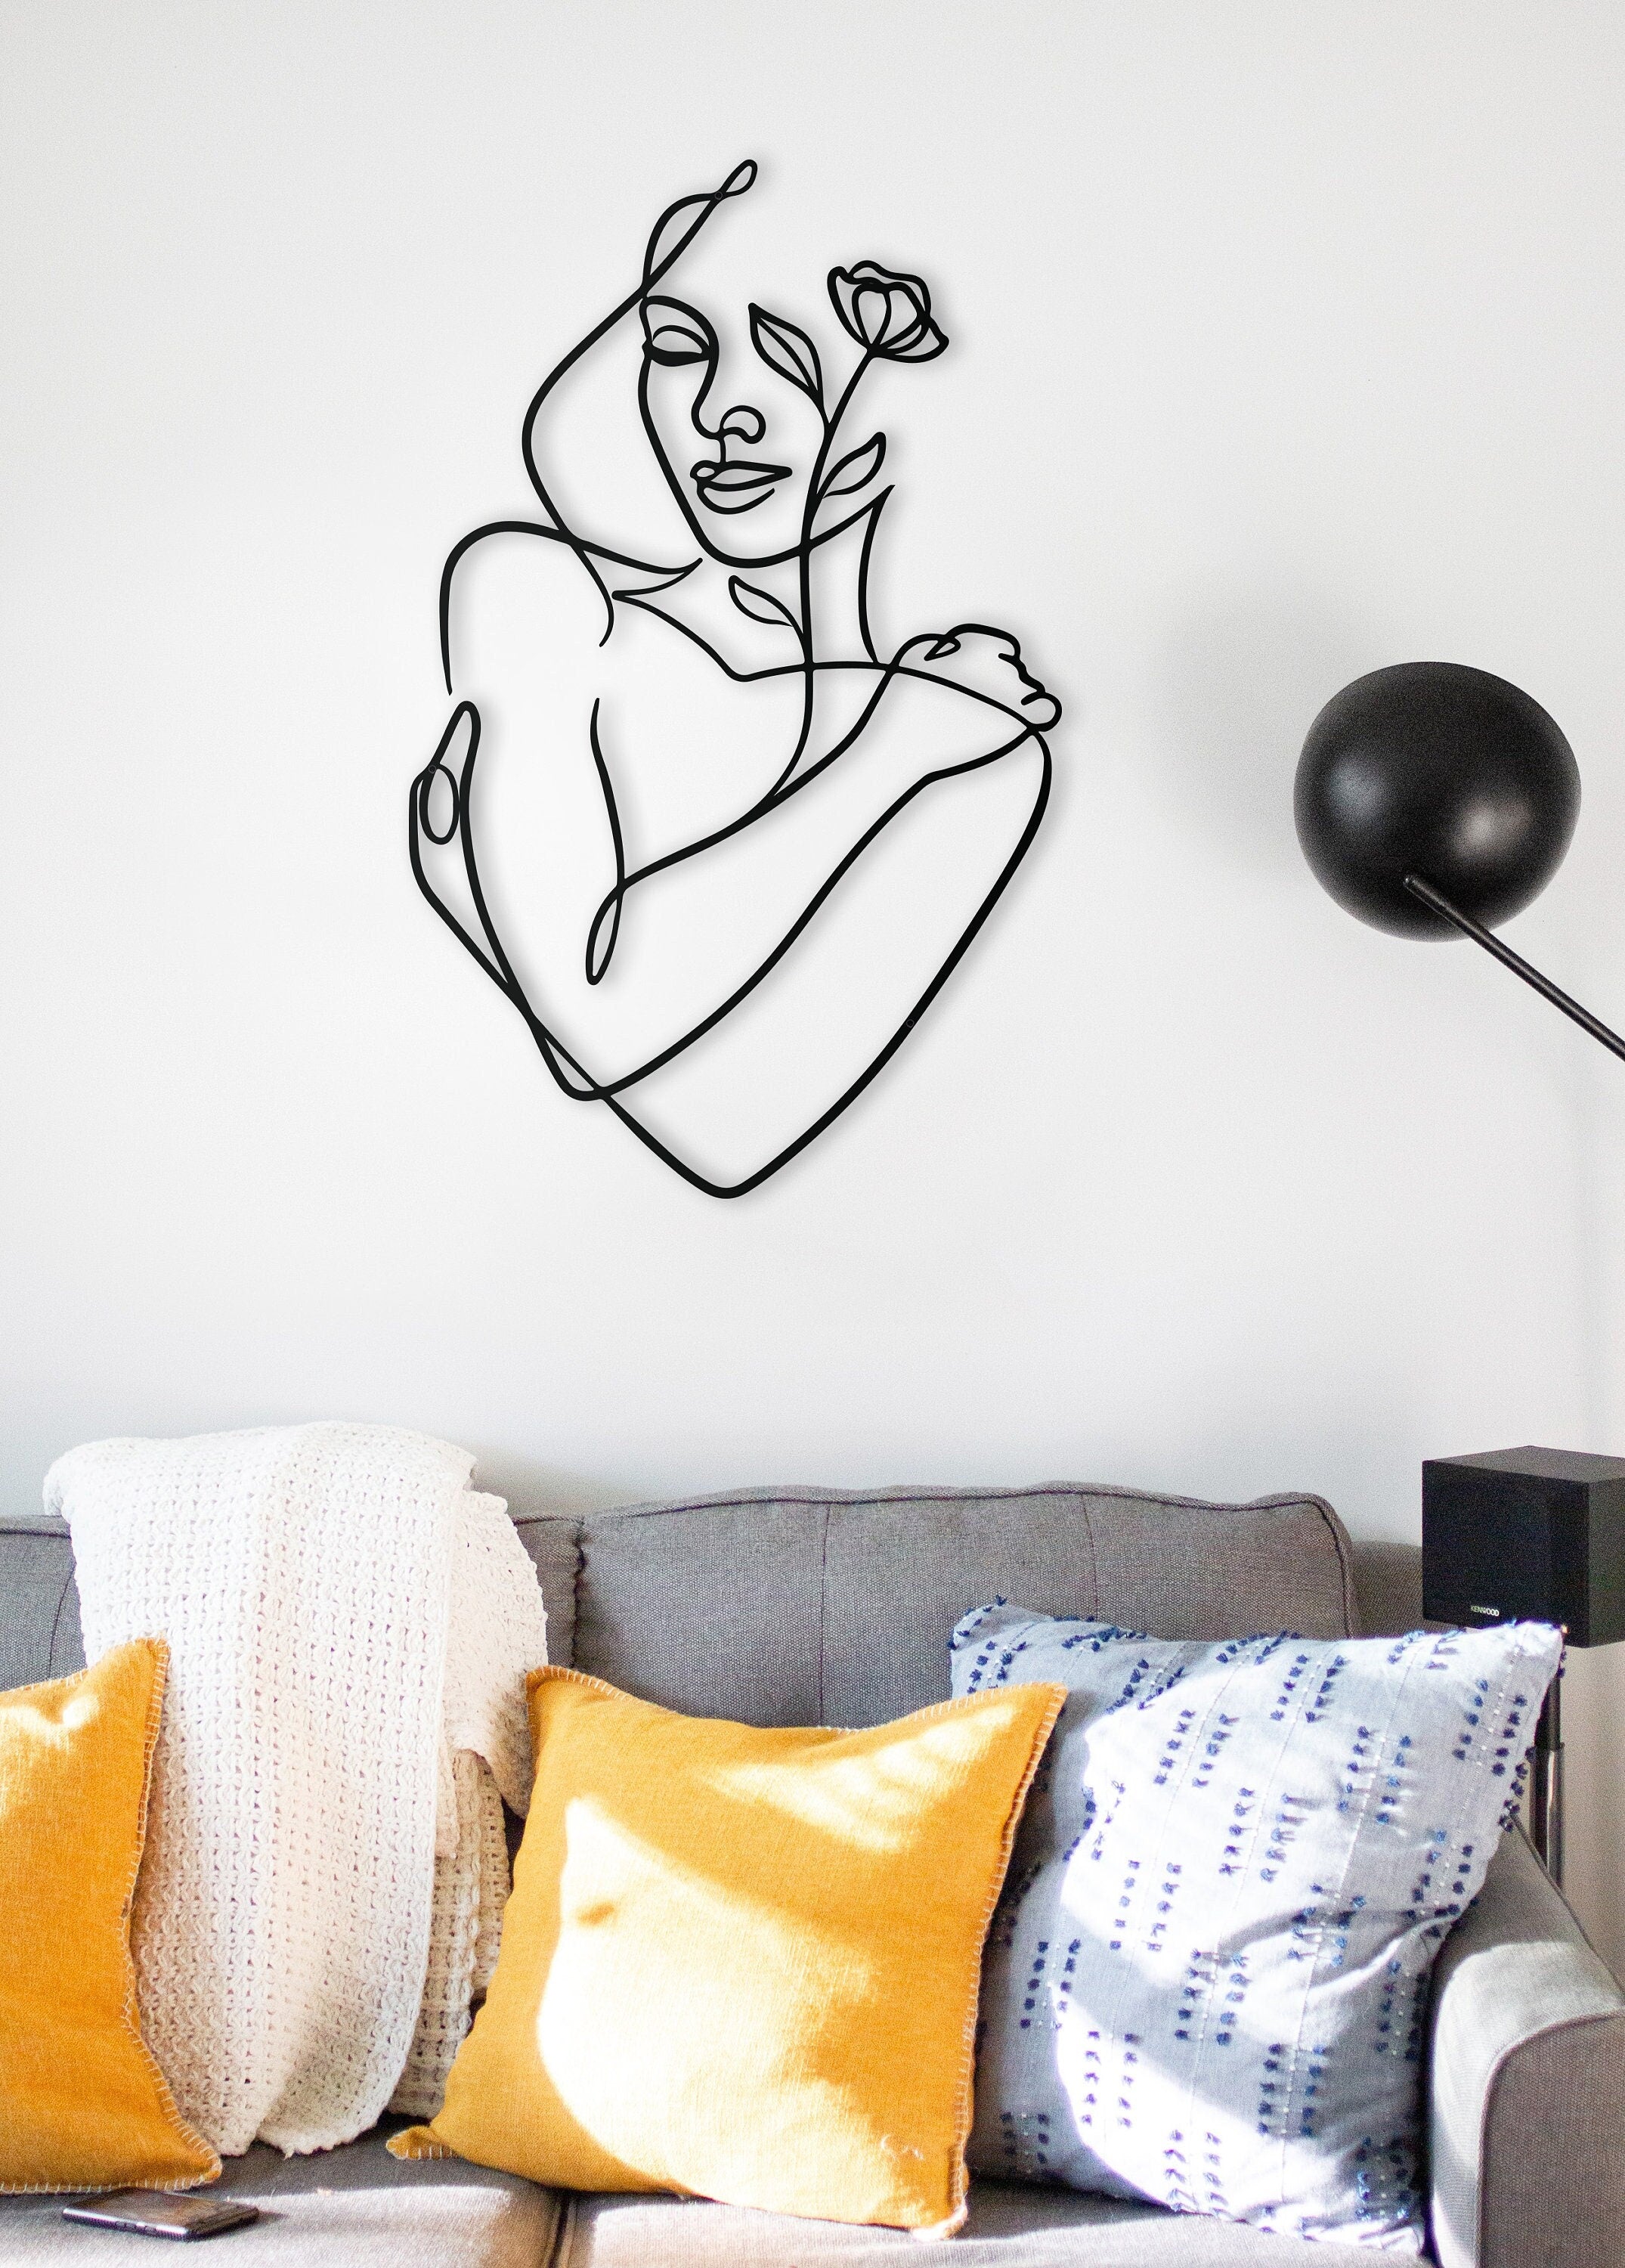 Minimalist Naked Woman Wall Decor, Minimalist Wall Art, Flower Wall Decor, Abstract Wall Decor,  Unique Over The Bed Decor, Home Decore